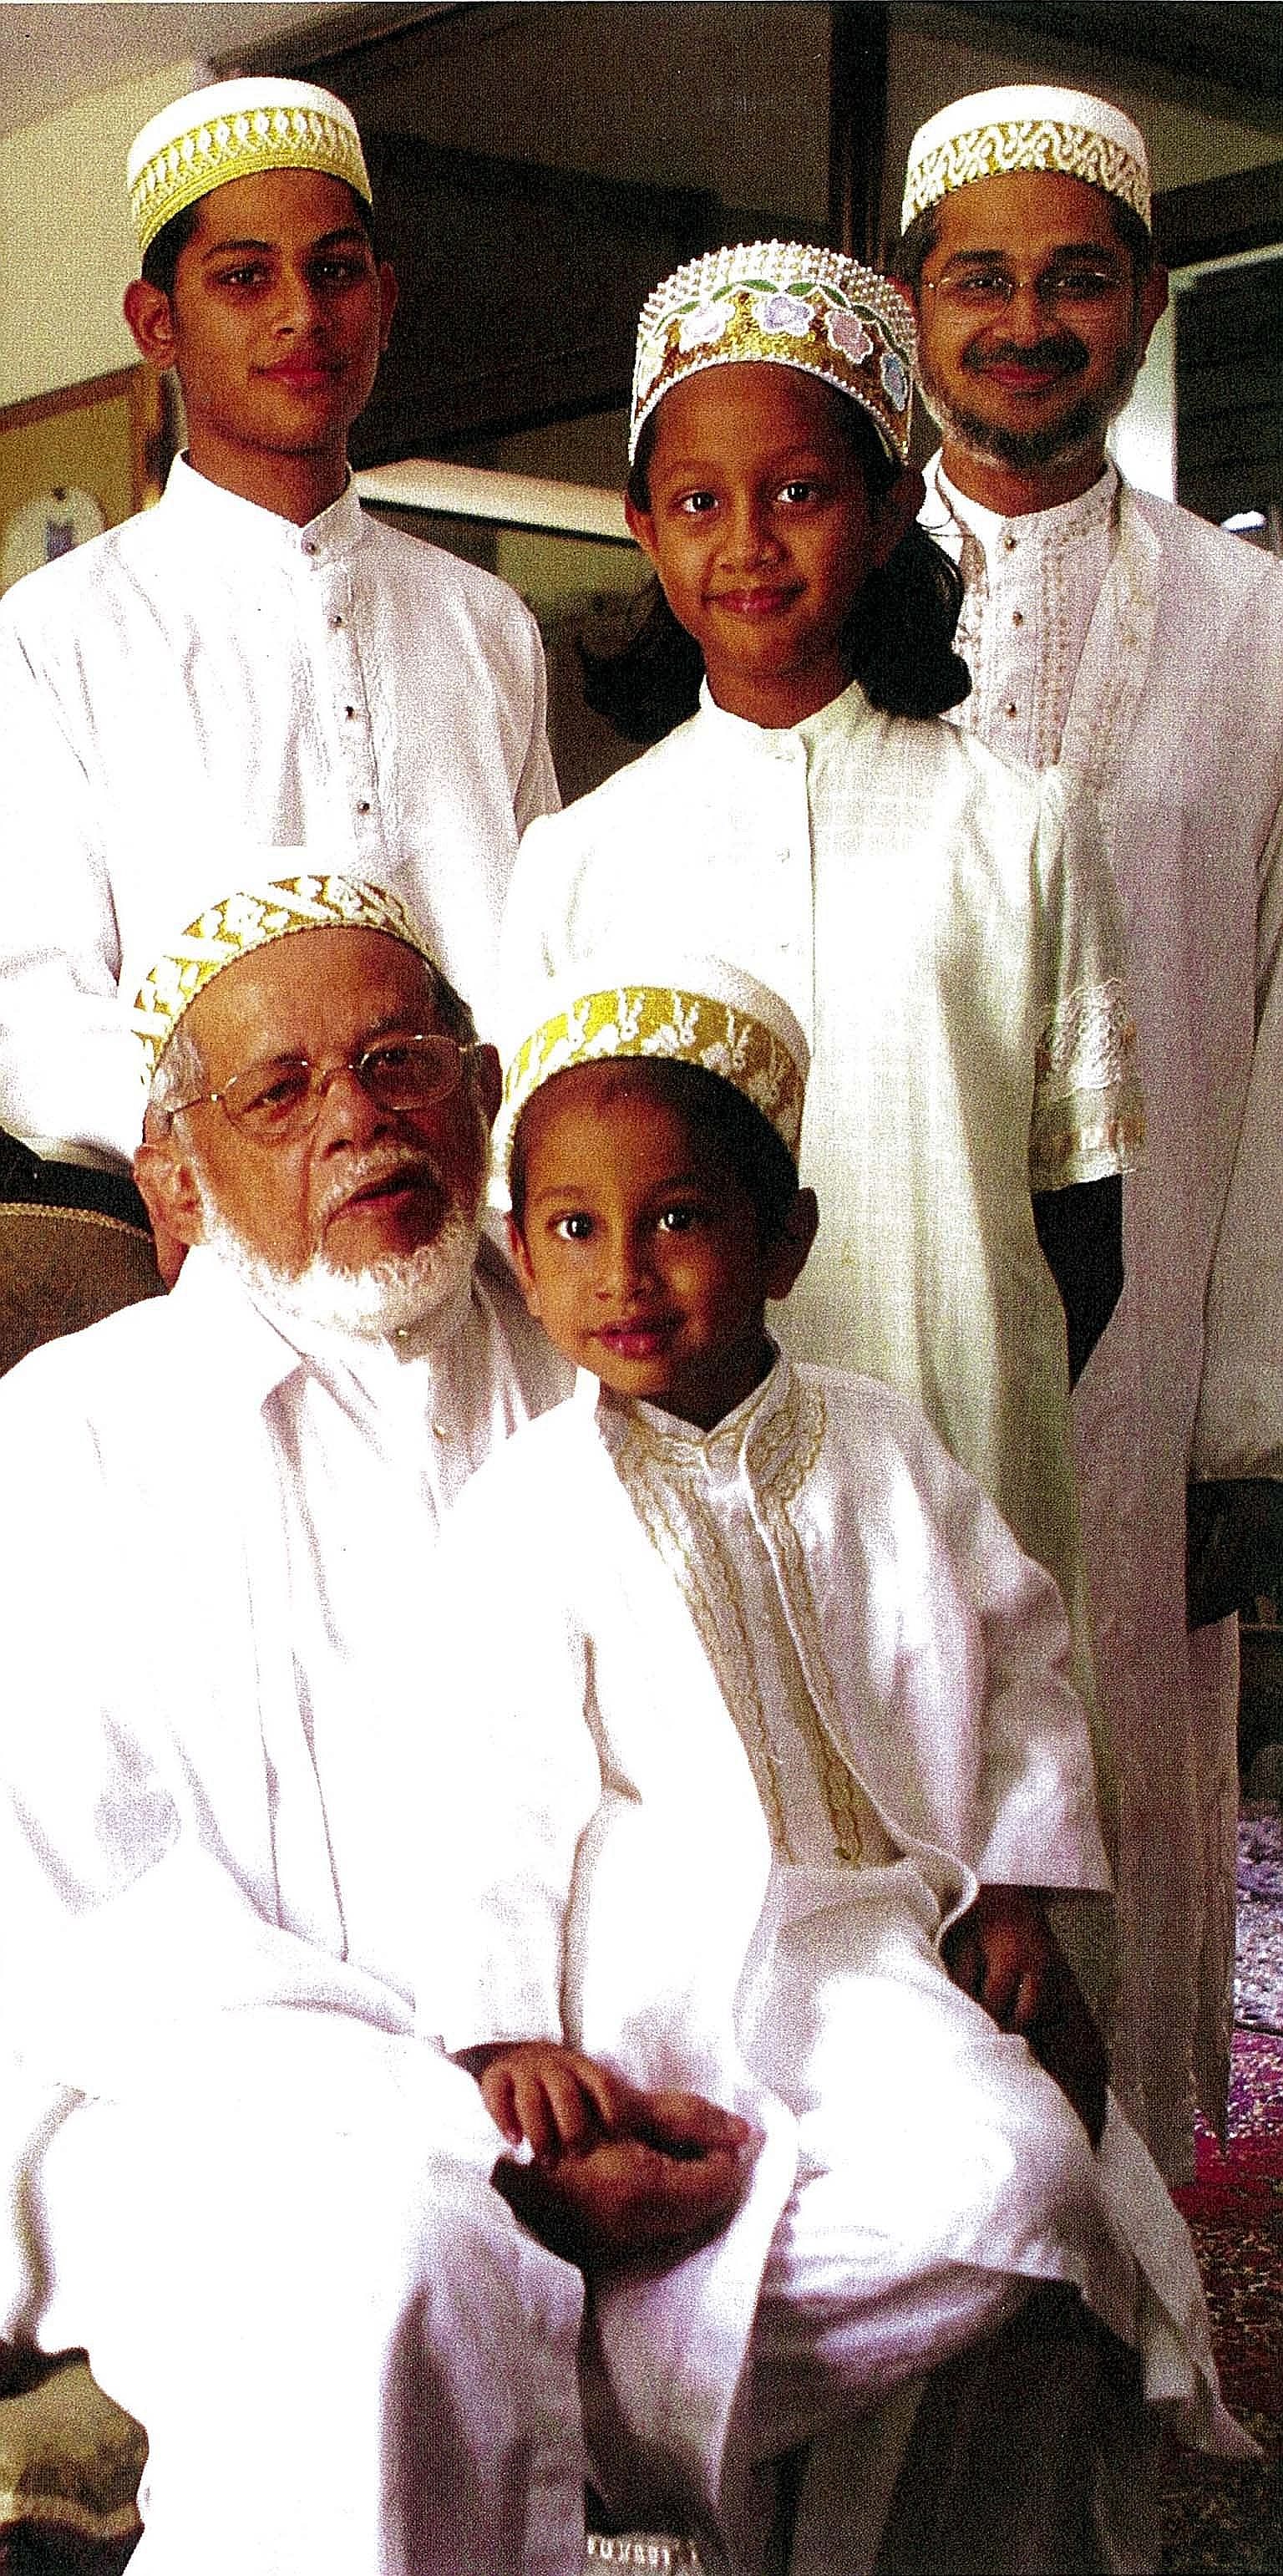 (Above): Spice trader Moez Nomanbhoy (right) and his son Hanif. (Left): An old photograph of Mr Moez Nomanbhoy (with his youngest grandson Aliasger on his lap). Standing: Mr Hanif (right) with his daughter Sakina and son Aqeel.